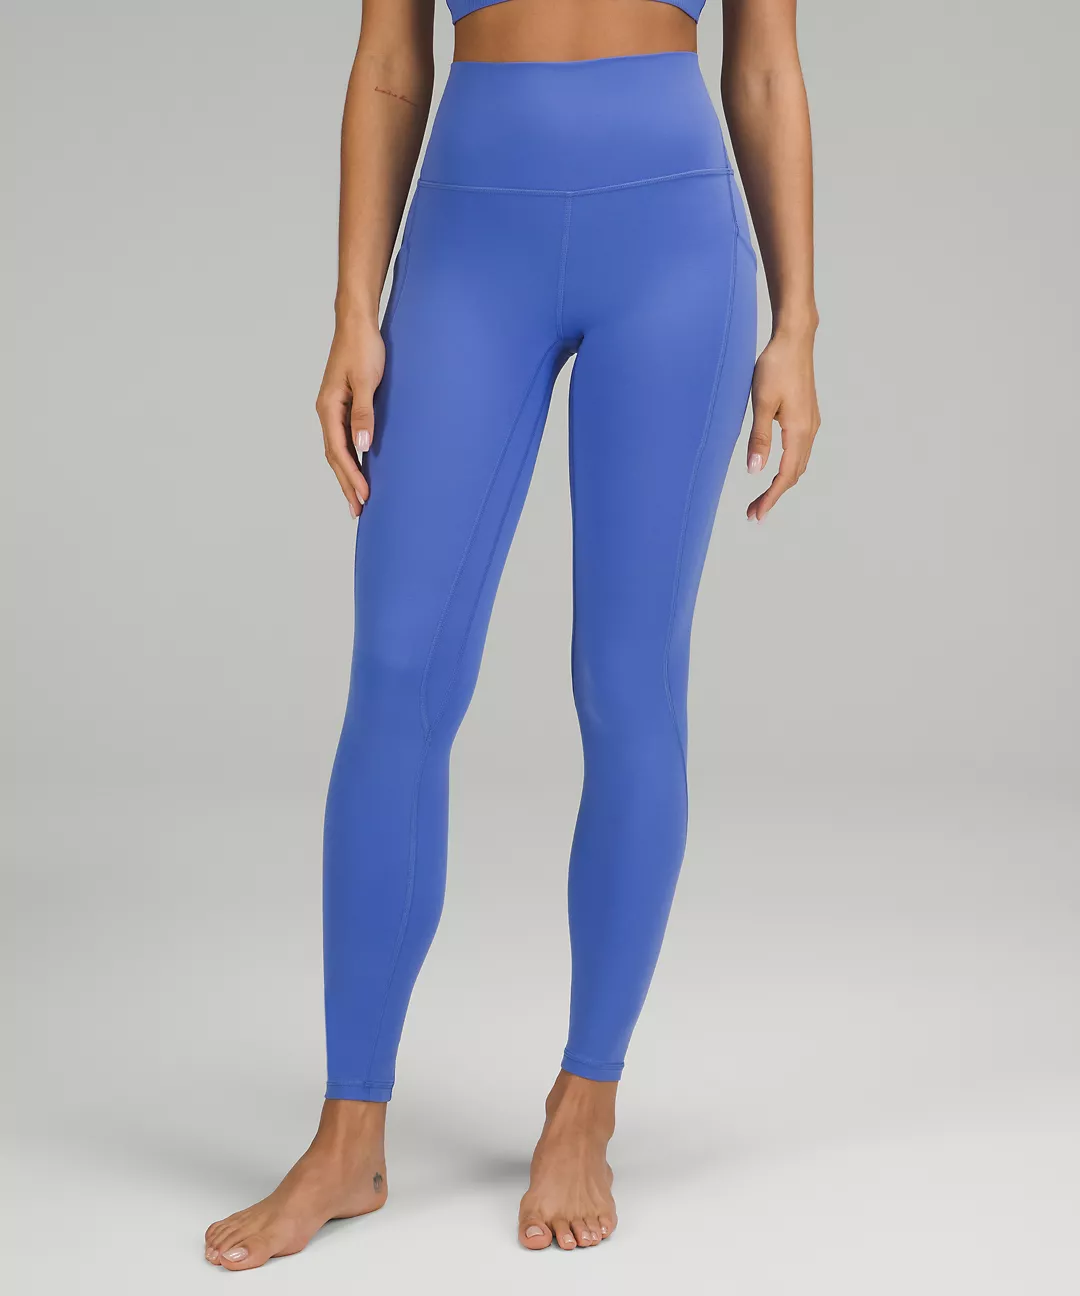 Discover Which Lululemon Leggings Offer the Most Compression - Playbite